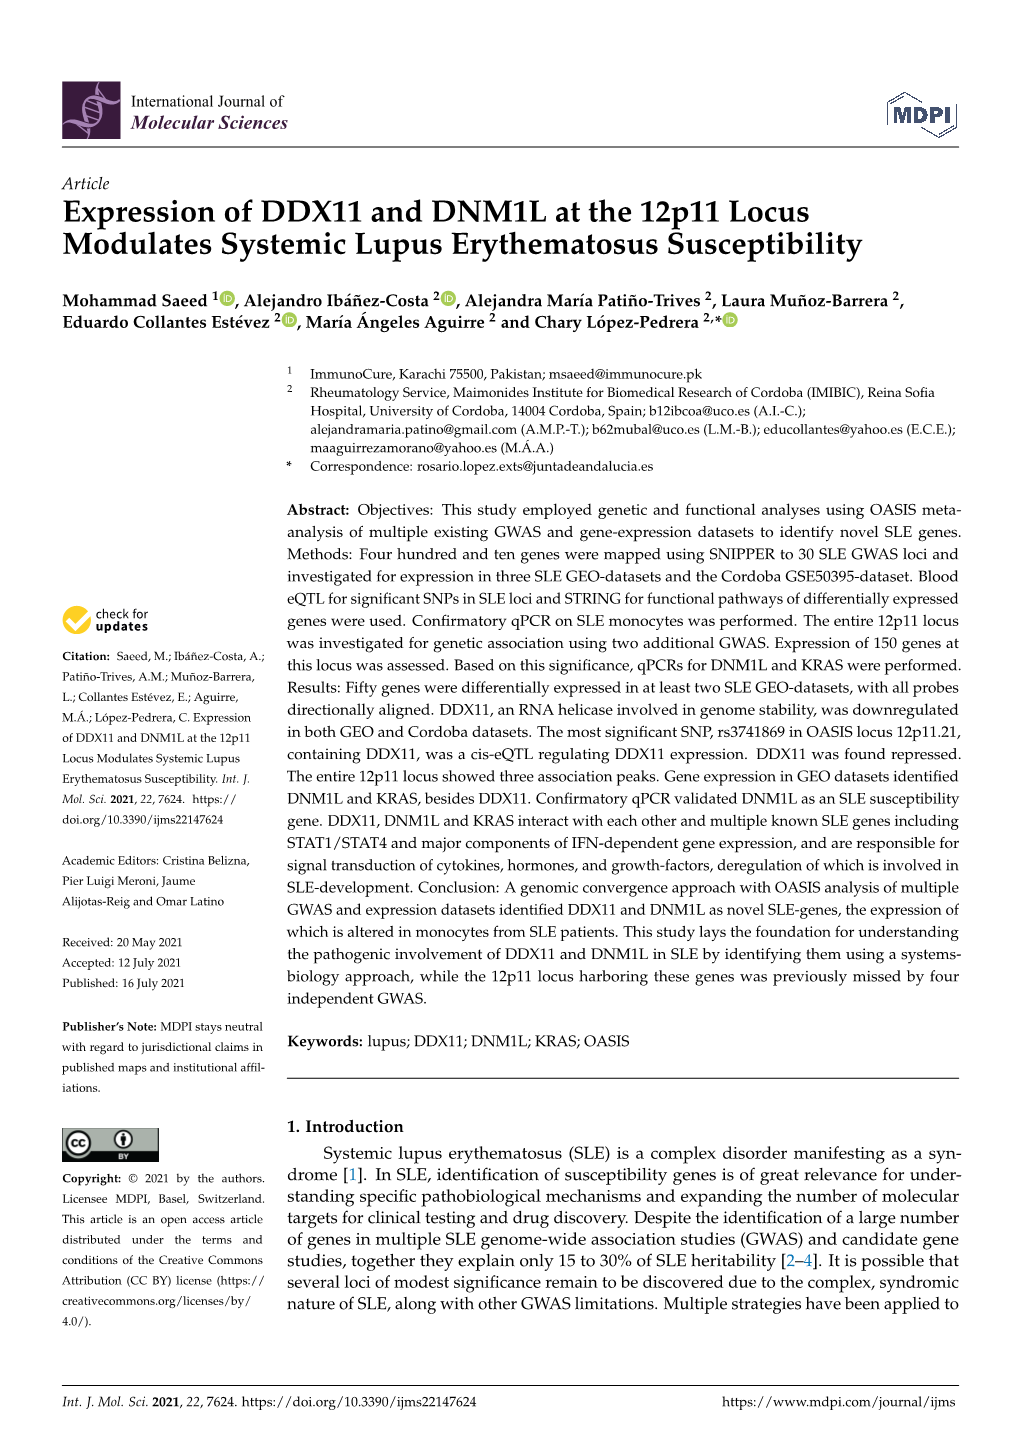 Expression of DDX11 and DNM1L at the 12P11 Locus Modulates Systemic Lupus Erythematosus Susceptibility